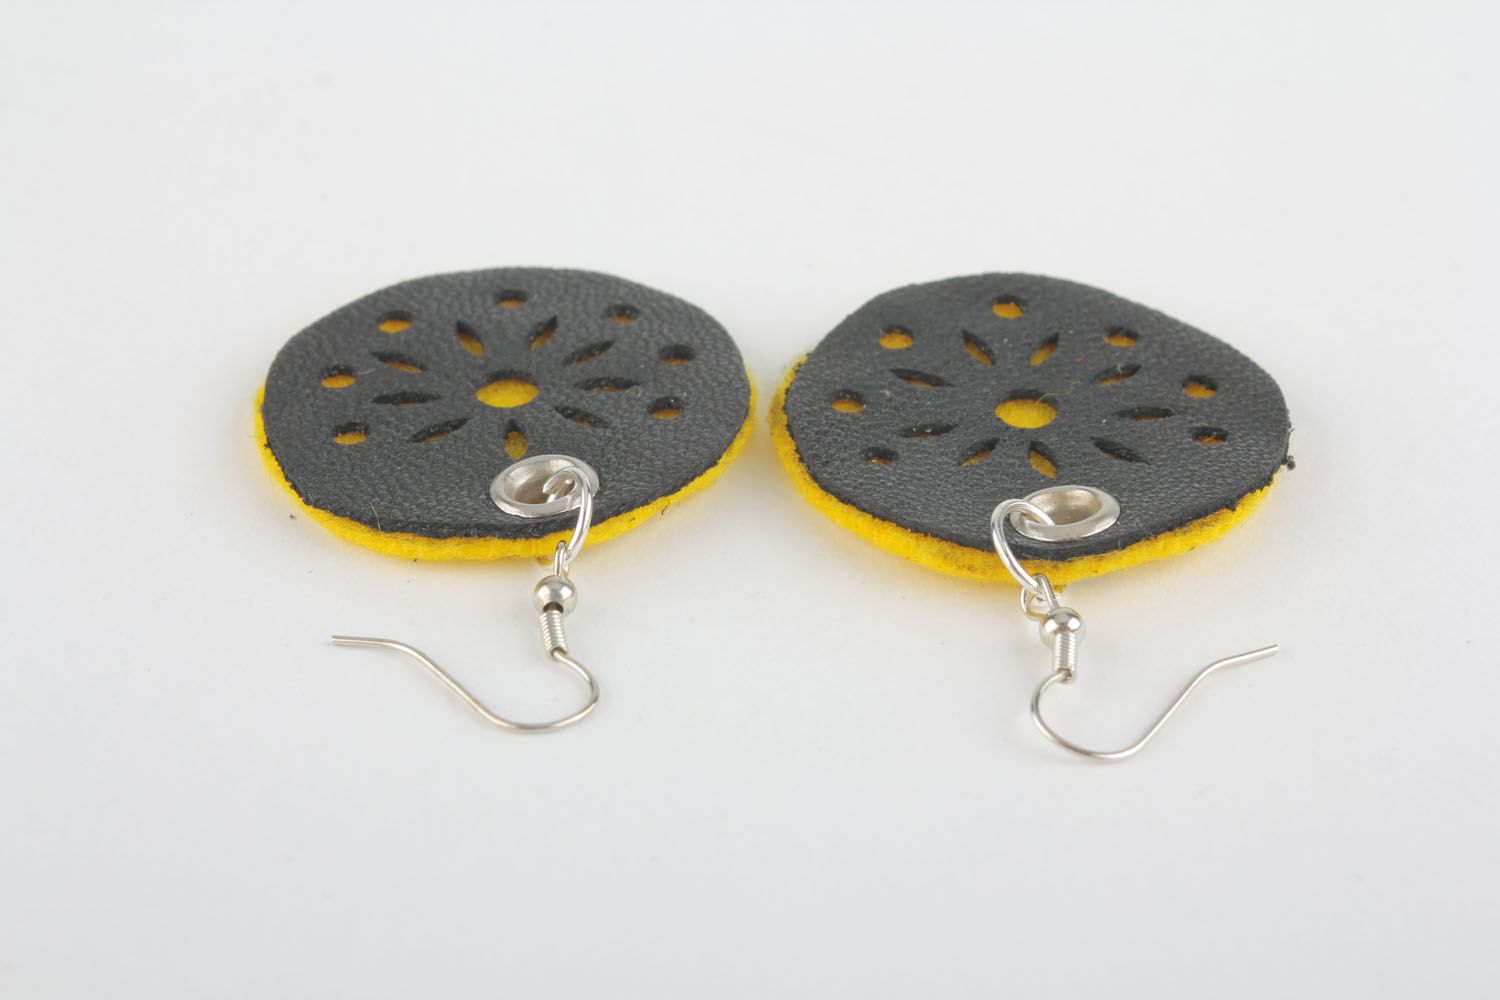 Women's earrings made of leather and felt photo 1